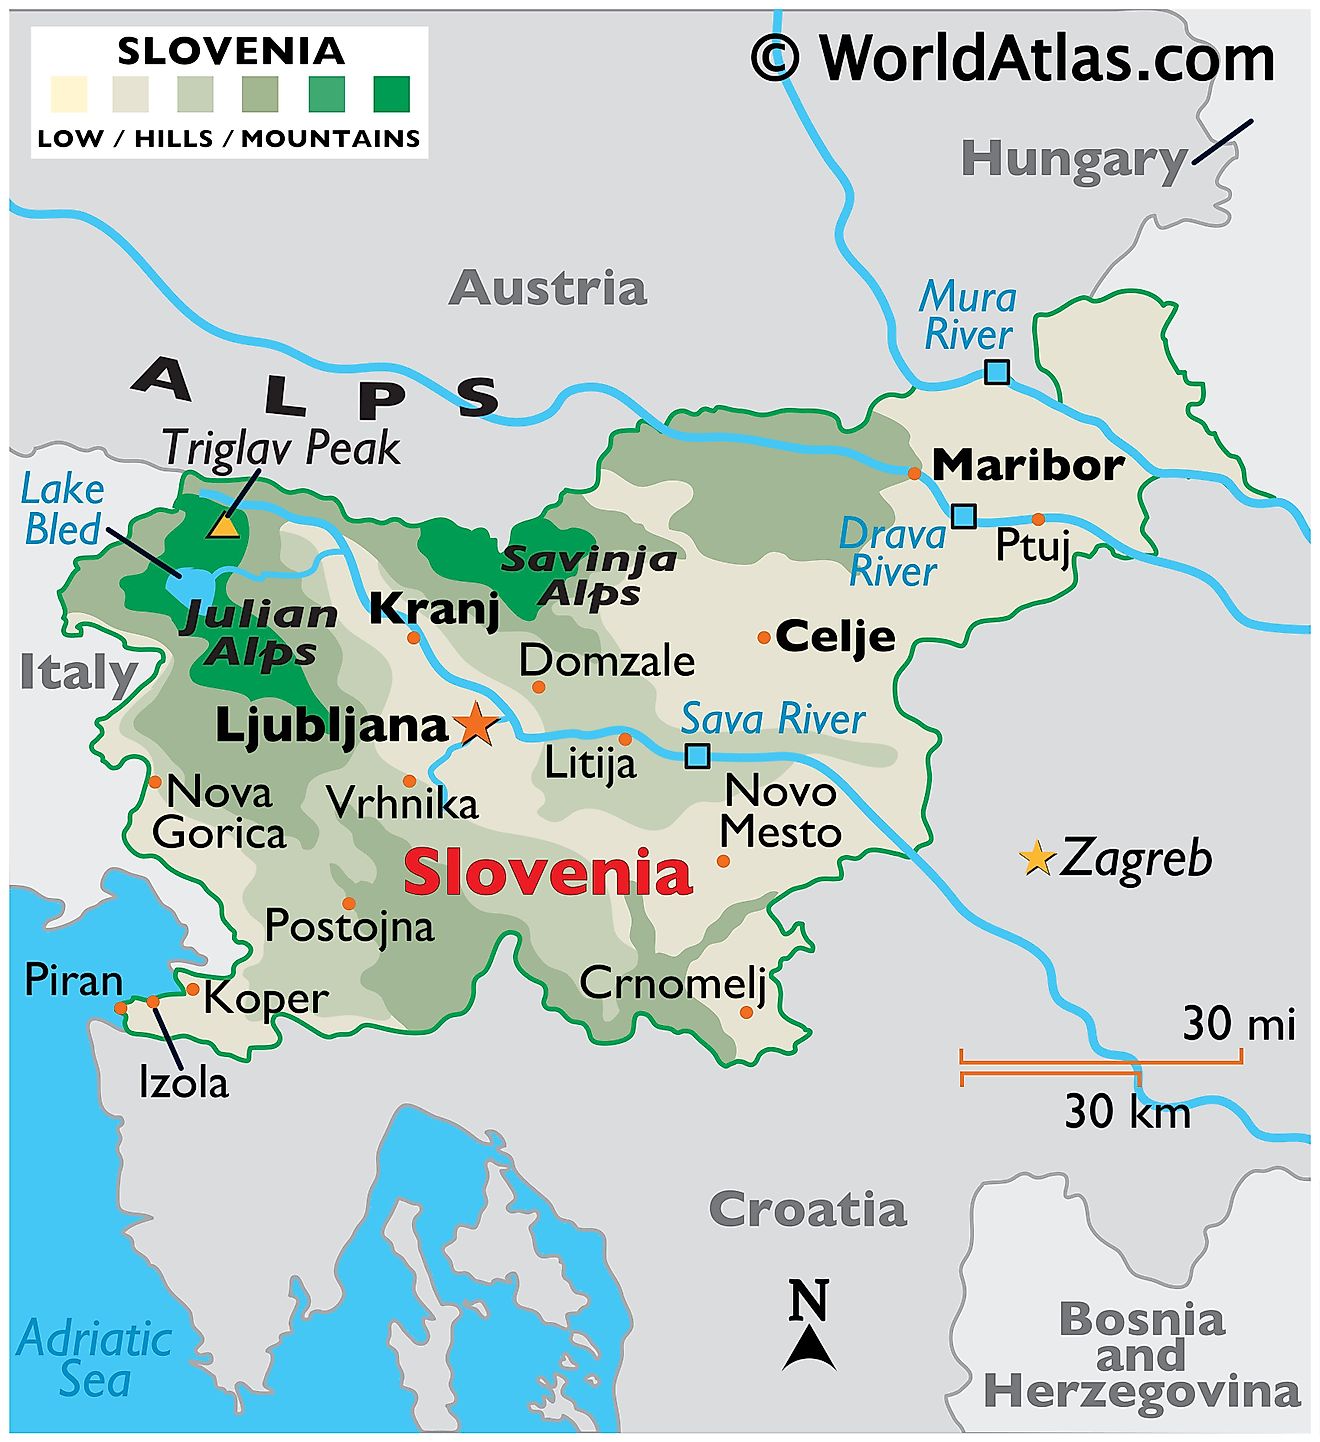 Physical Map of Slovenia showing relief, international boundaries, major rivers, mountain ranges, extreme points, important cities, etc.